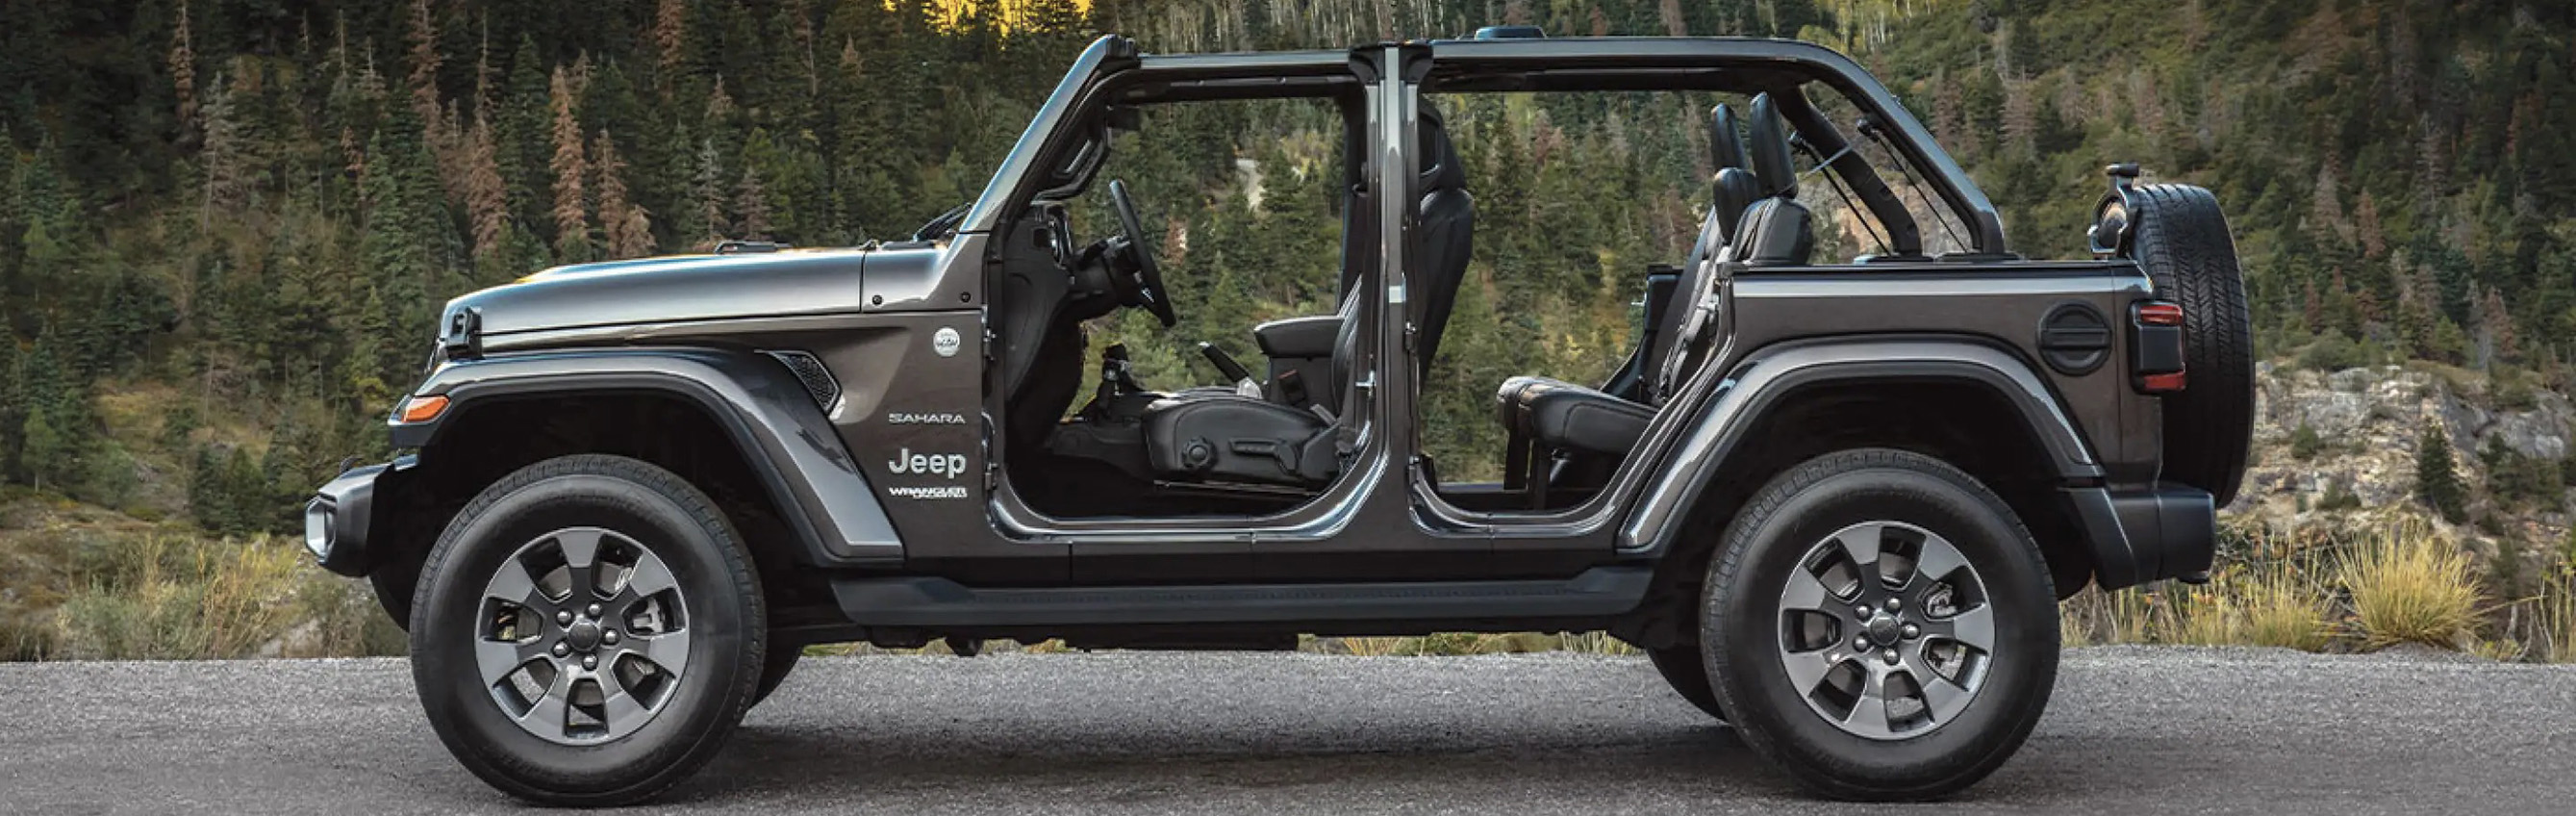 2022 Jeep Wrangler Unlimited Review | Grapevine Dodge Chrysler Jeep Ram